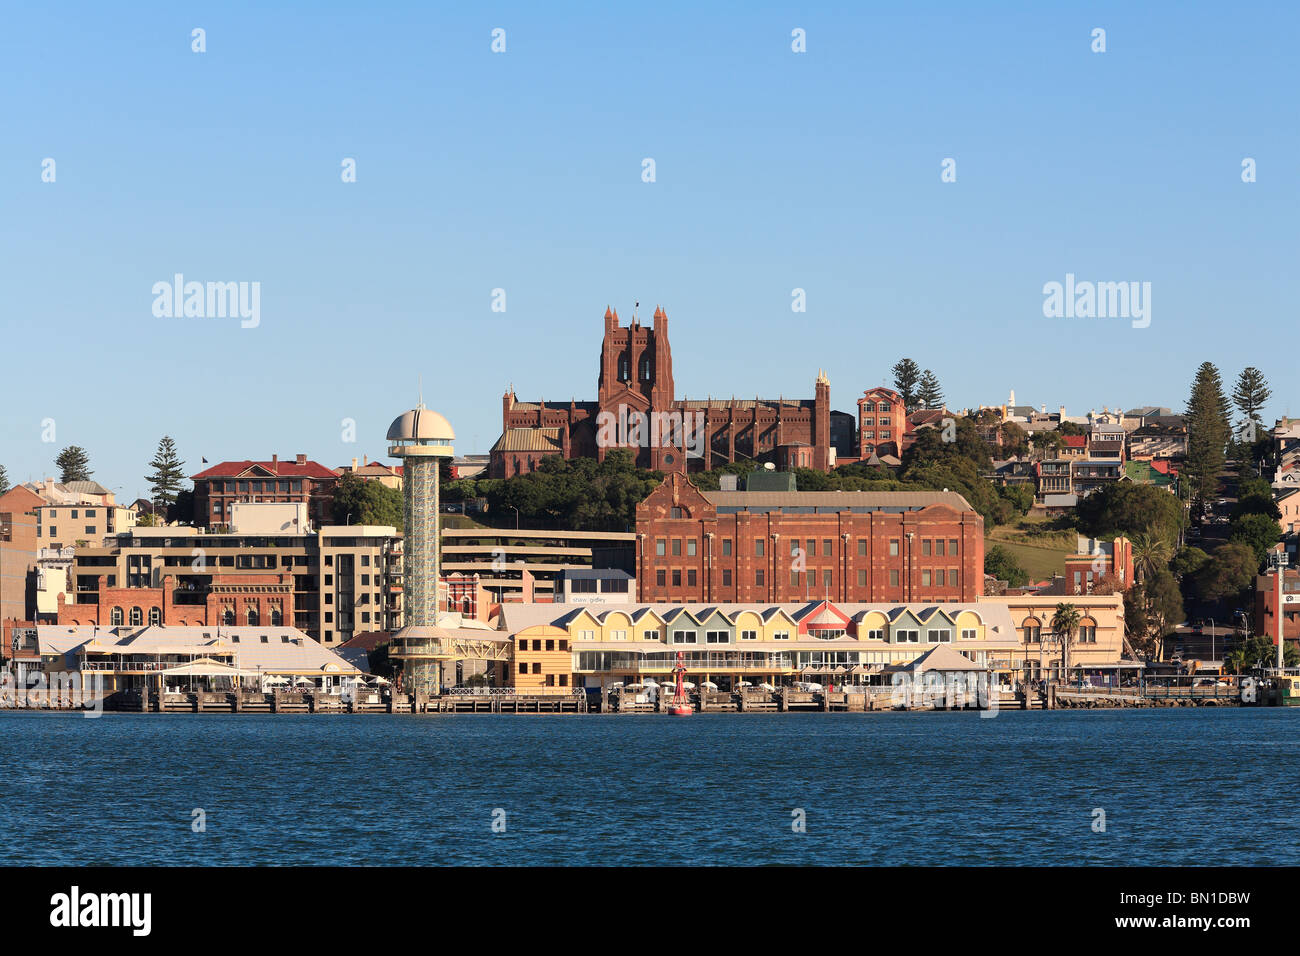 Waterfront at Newcastle, NSW, Australia, looking across the Hunter River from Stockton. Stock Photo